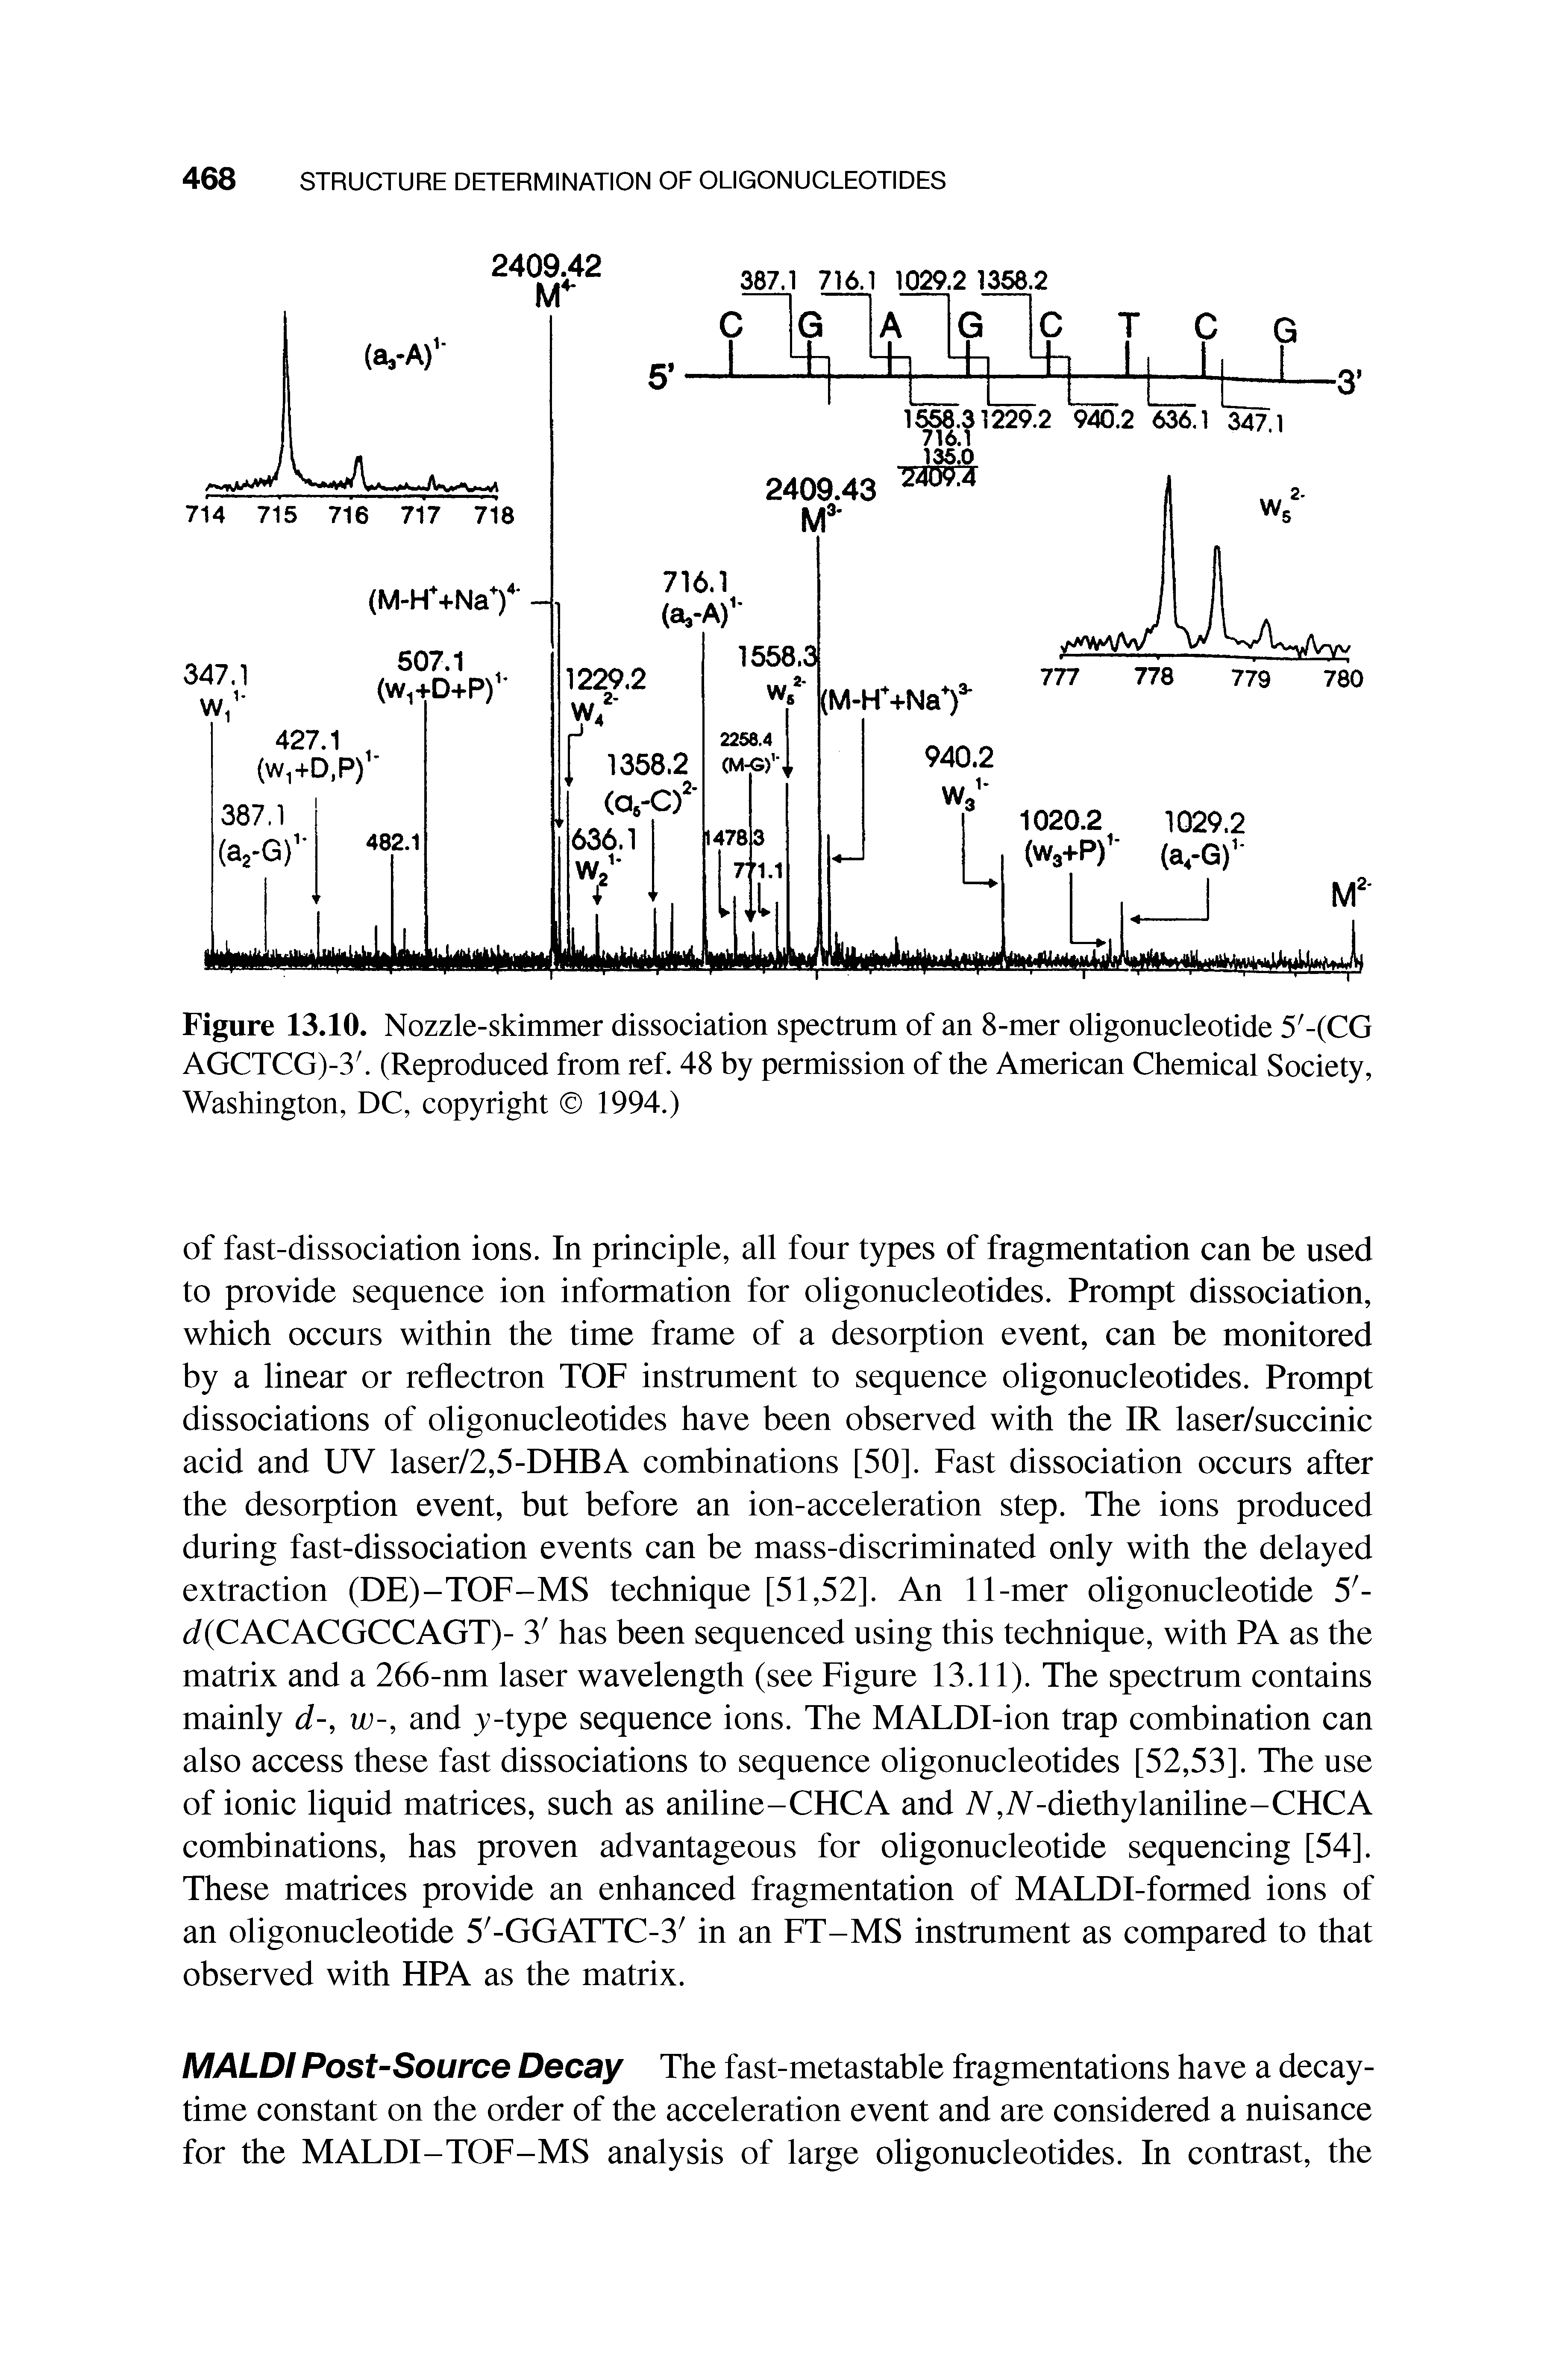 Figure 13.10. Nozzle-skimmer dissociation spectrum of an 8-mer oligonucleotide 5 -(CG AGCTCG)-3. (Reproduced from ref. 48 by permission of the American Chemical Society, Washington, DC, copyright 1994.)...